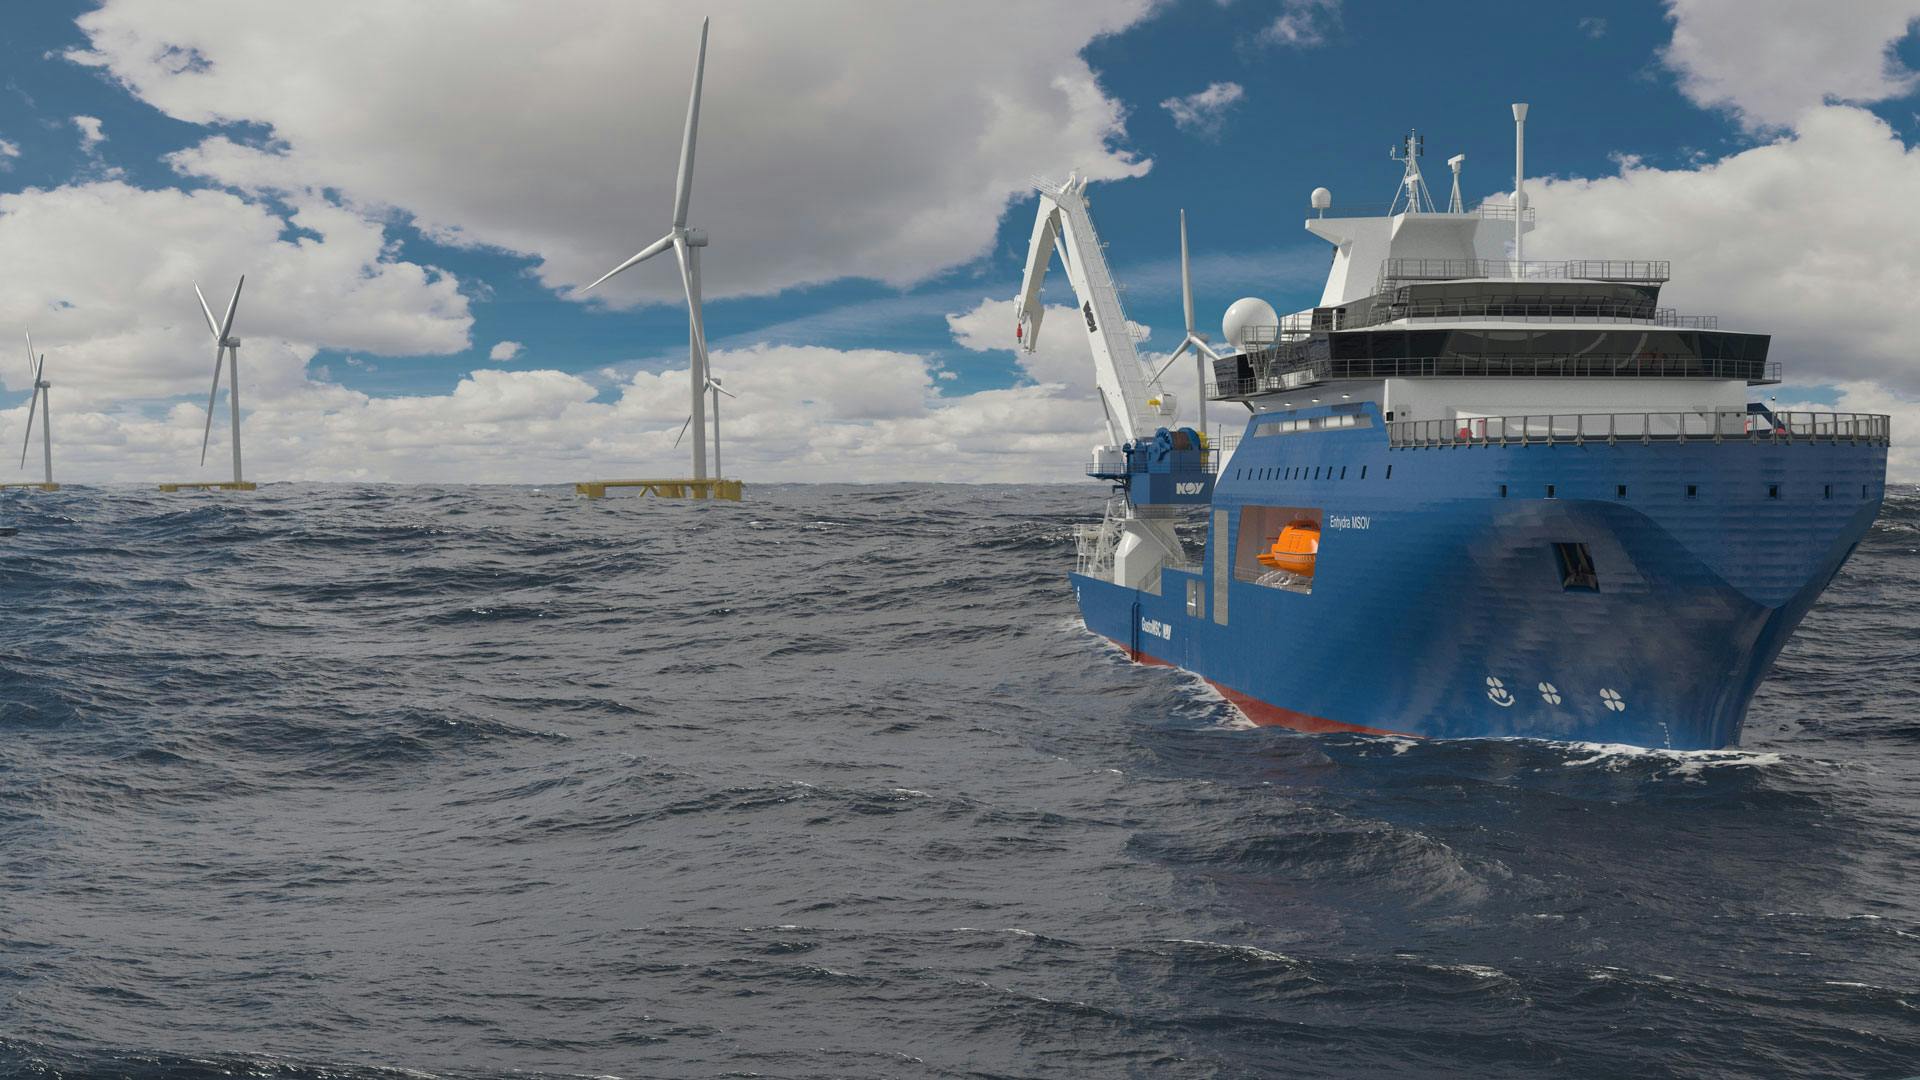 Vessel render with floating wind farm in background